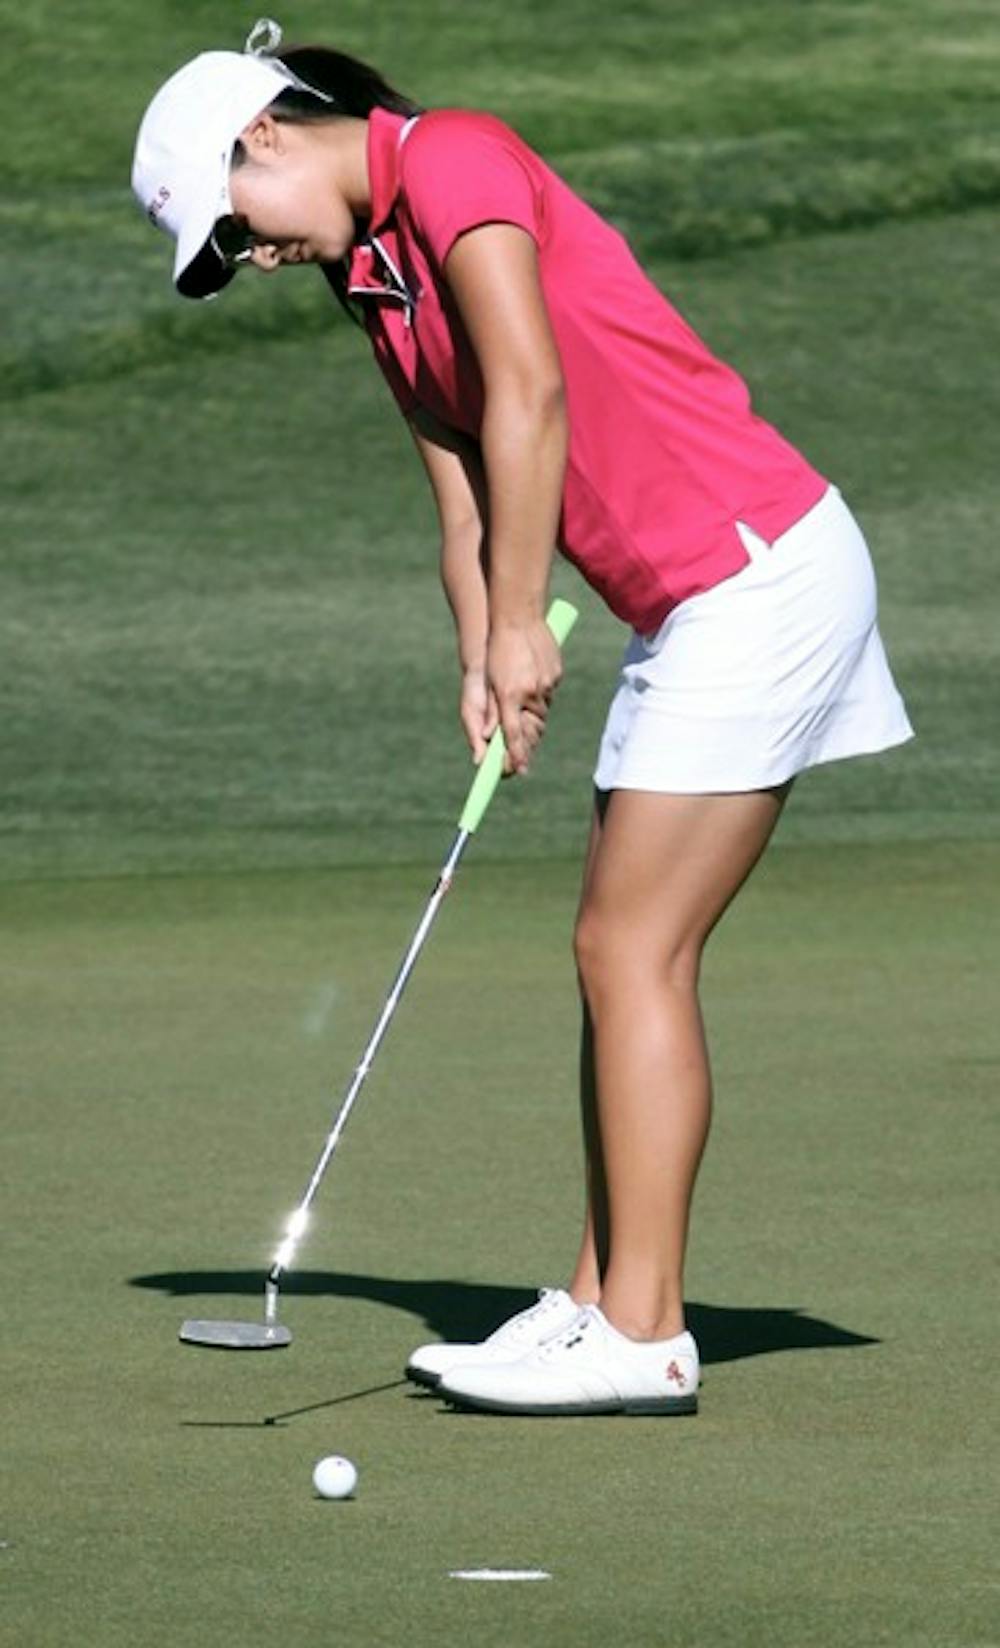 ALMOST THERE: Sophomore Justine Lee attempts a putt during the PING/ASU Invitational at the ASU Karsten Golf Course last April. Lee tied for eighth place in the NCAA Fall Preview over the weekend. (Photo by Beth Easterbrook)